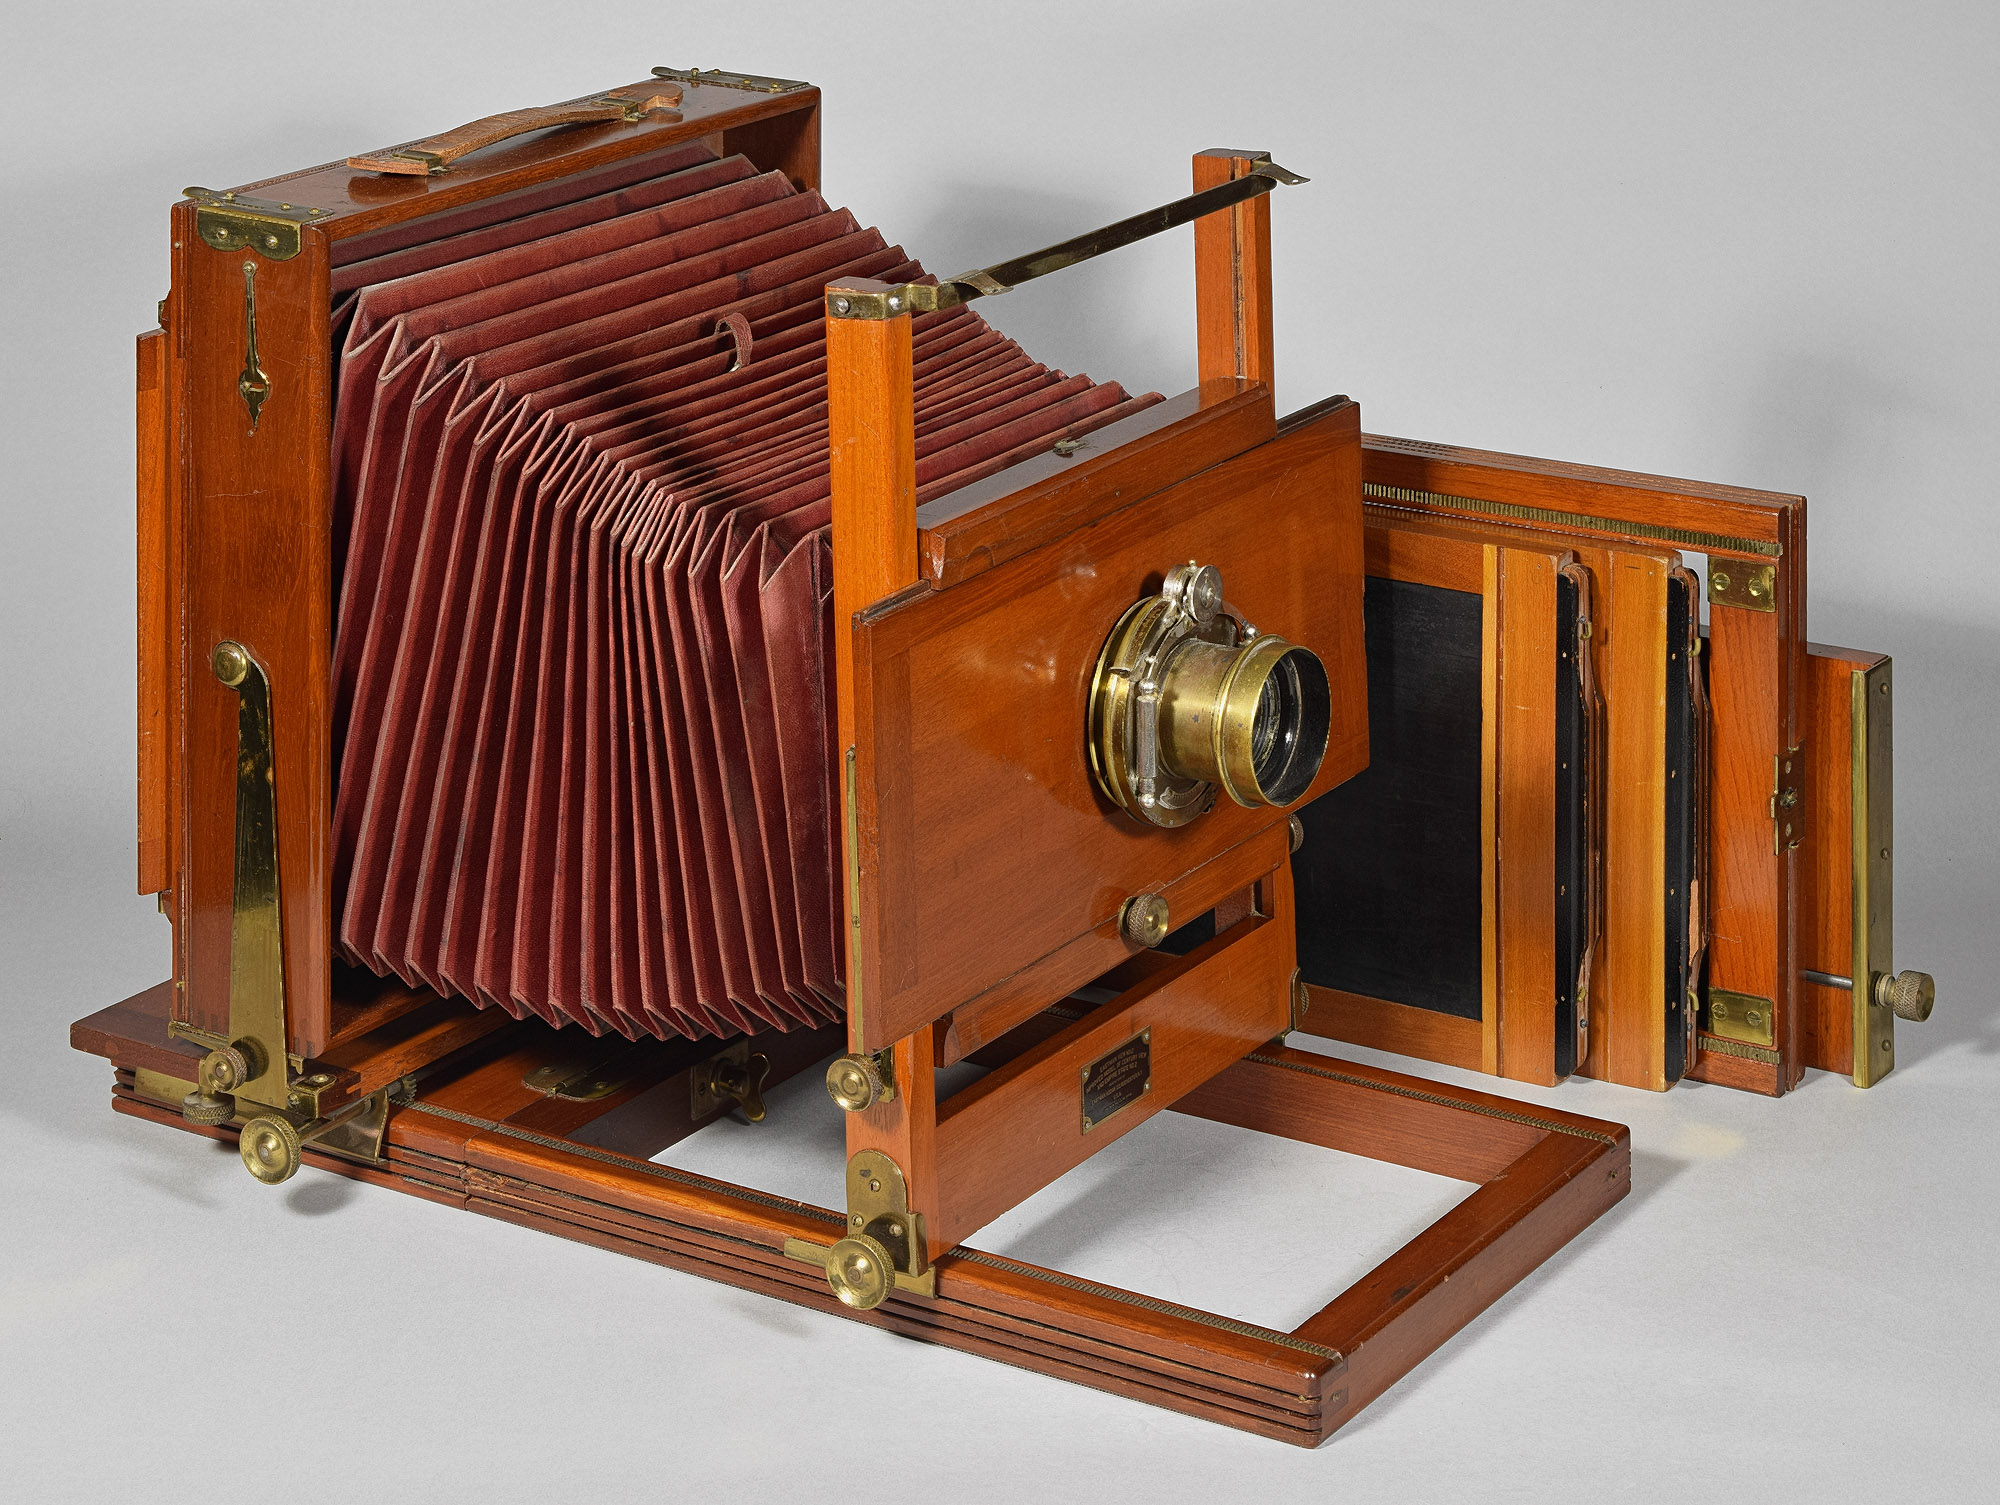 1231.Eastman.Kodak-Eastman.View.No.2-7x11-a-camera.with.two.holders.extension.and.tripod.base-2000.jpg